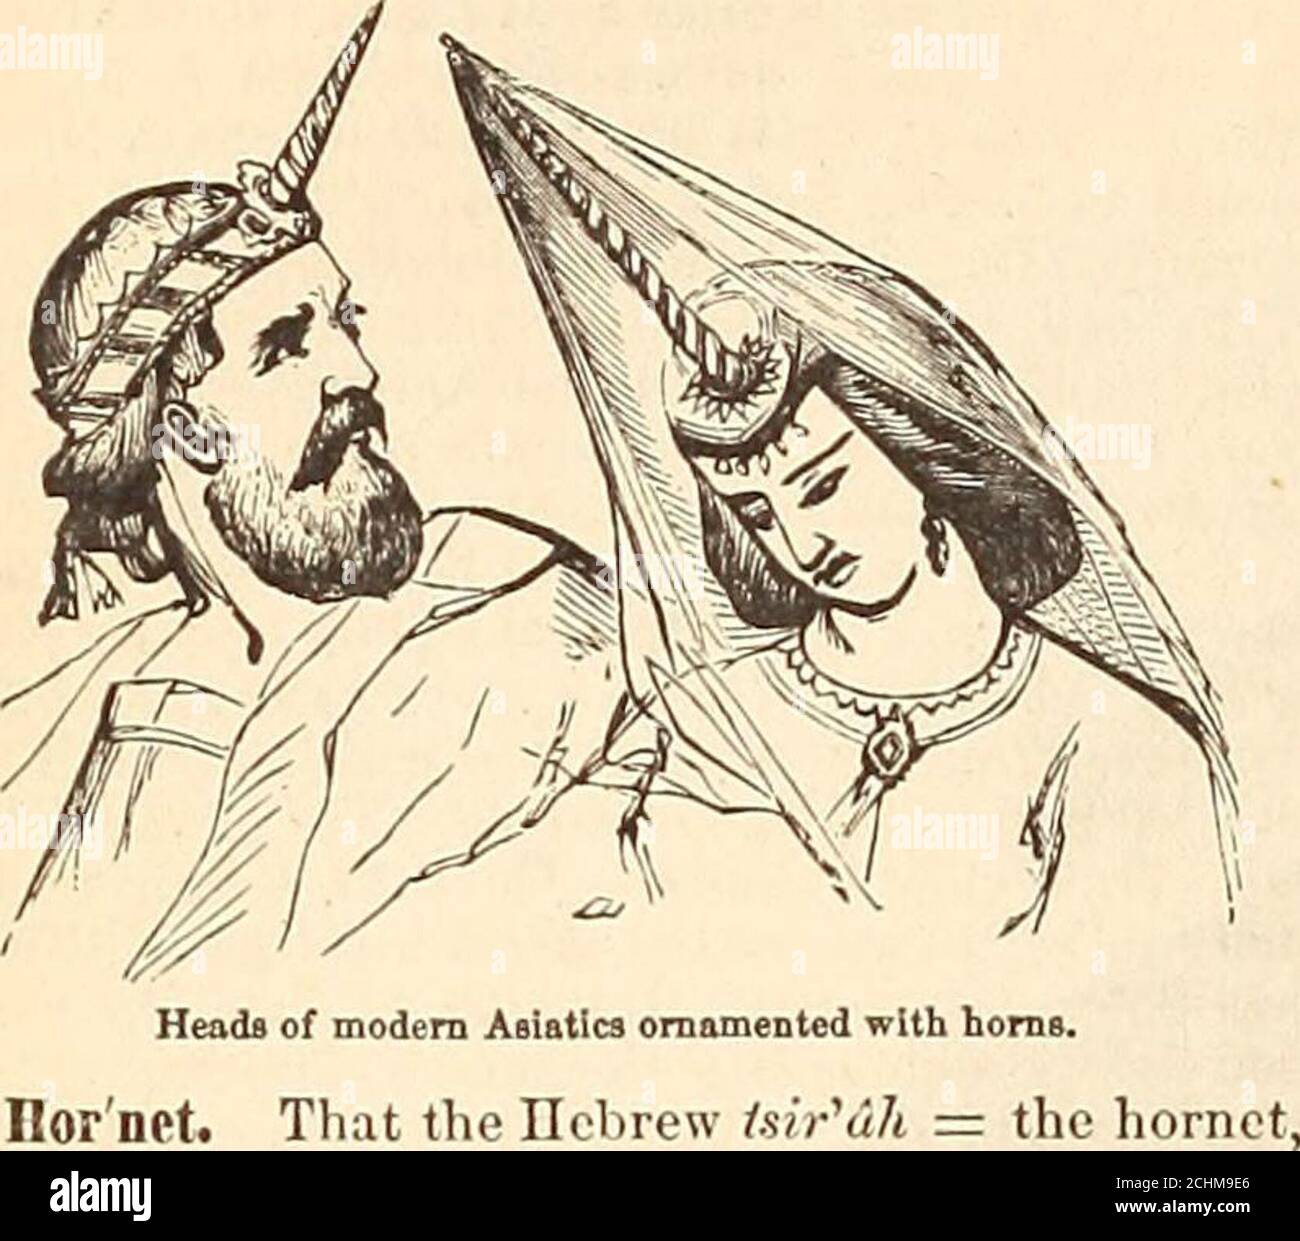 . A comprehensive dictionary of the Bible . f horn,but to have been metallic projections from thefour corners. The peak or summit of a hill wascalled a horn (Is. v. 1, margin). In Hab. iii. 4 horns coming out of his hand = rays of light. 2. From similarity of position and use. Two pr in-cipal applications of this metaphor will be found—strength and honor. Of strength the horn of theunicorn was the most frequent representative (Deut.xxxiii. 17, &c), but not always; compare 1 K. xxii.11, where probably horns of iron, worn defiantlyand symbolically on the head, are intended. Amongthe Druses upon Stock Photo